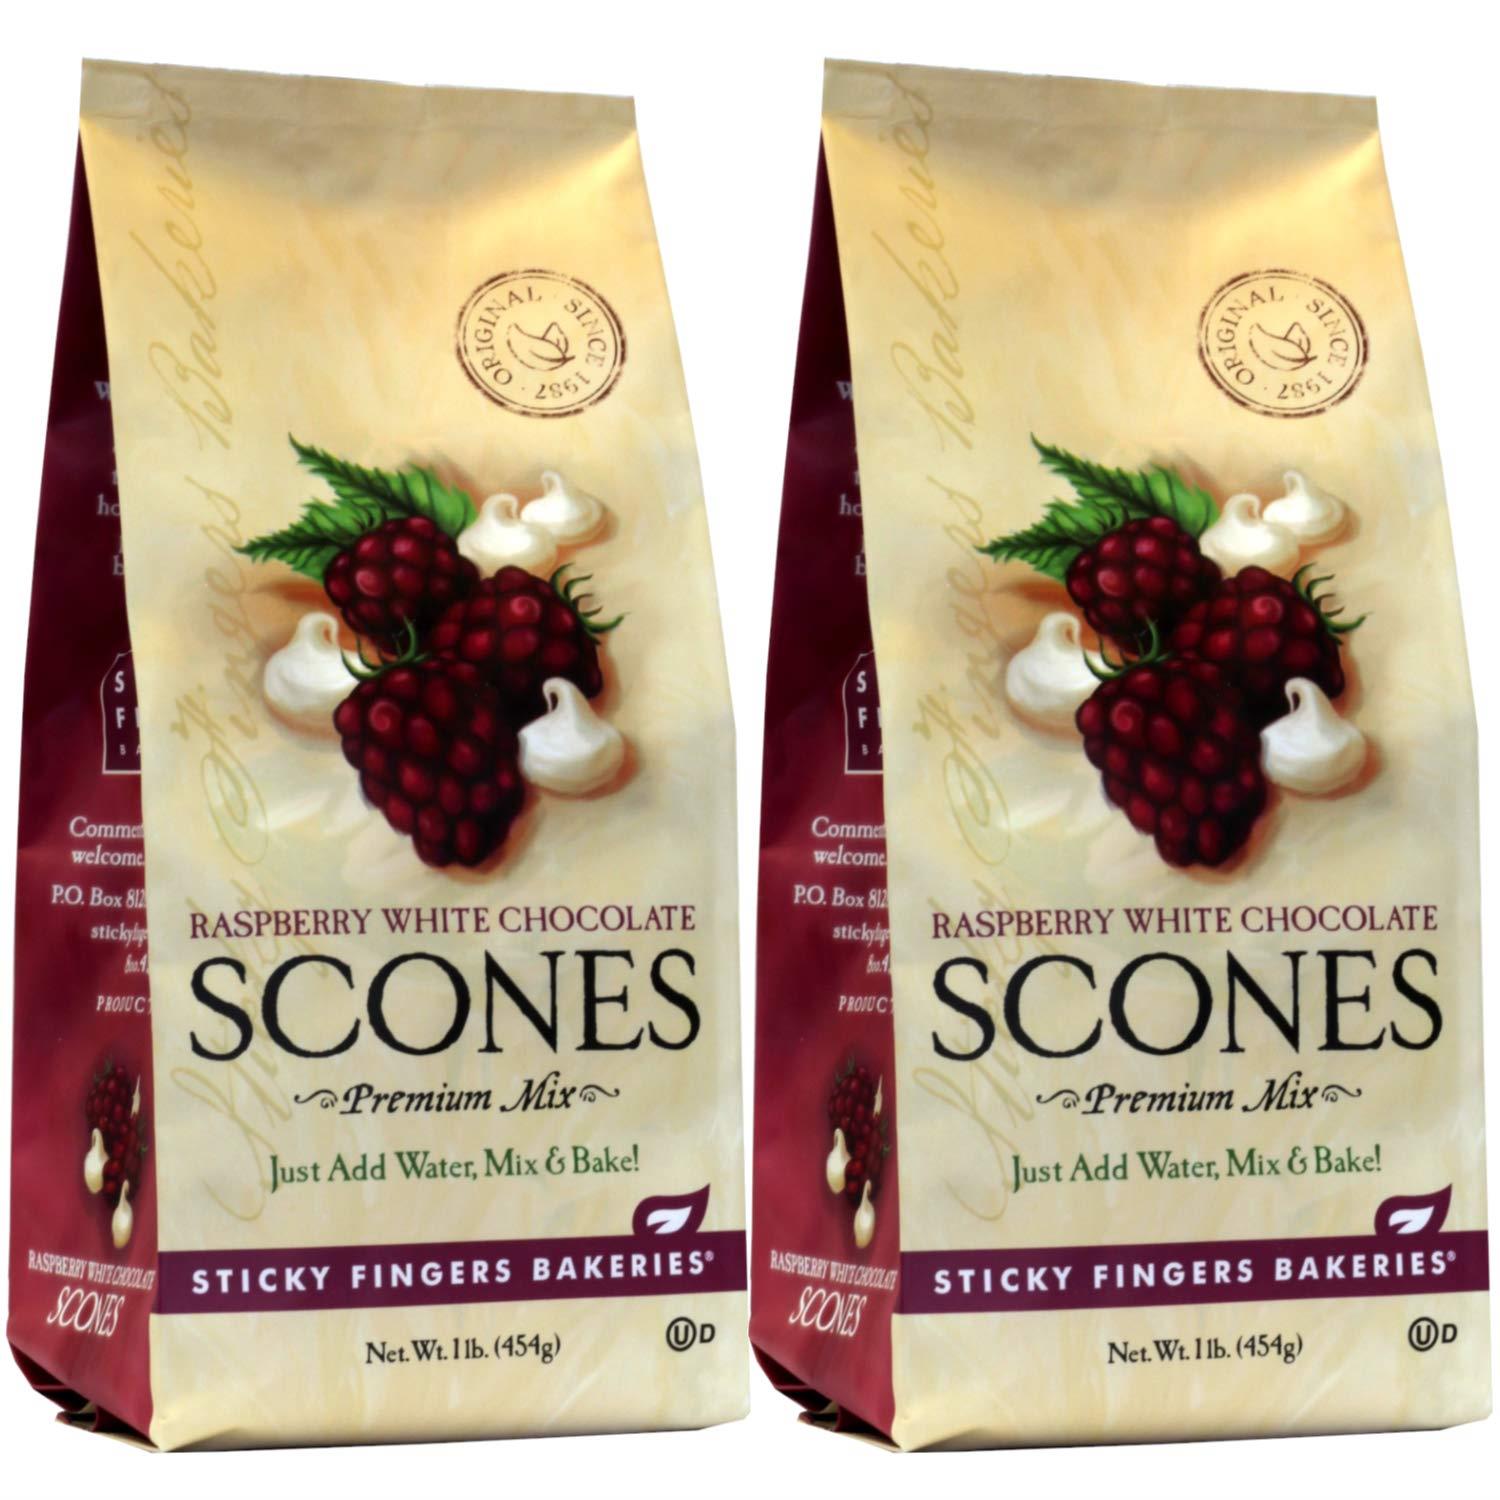 English Scone Mix, Raspberry White Chocolate by Sticky Fingers Bakeries – Easy to Make English Scones Fresh Baked, Makes 12 Scones (2pk)